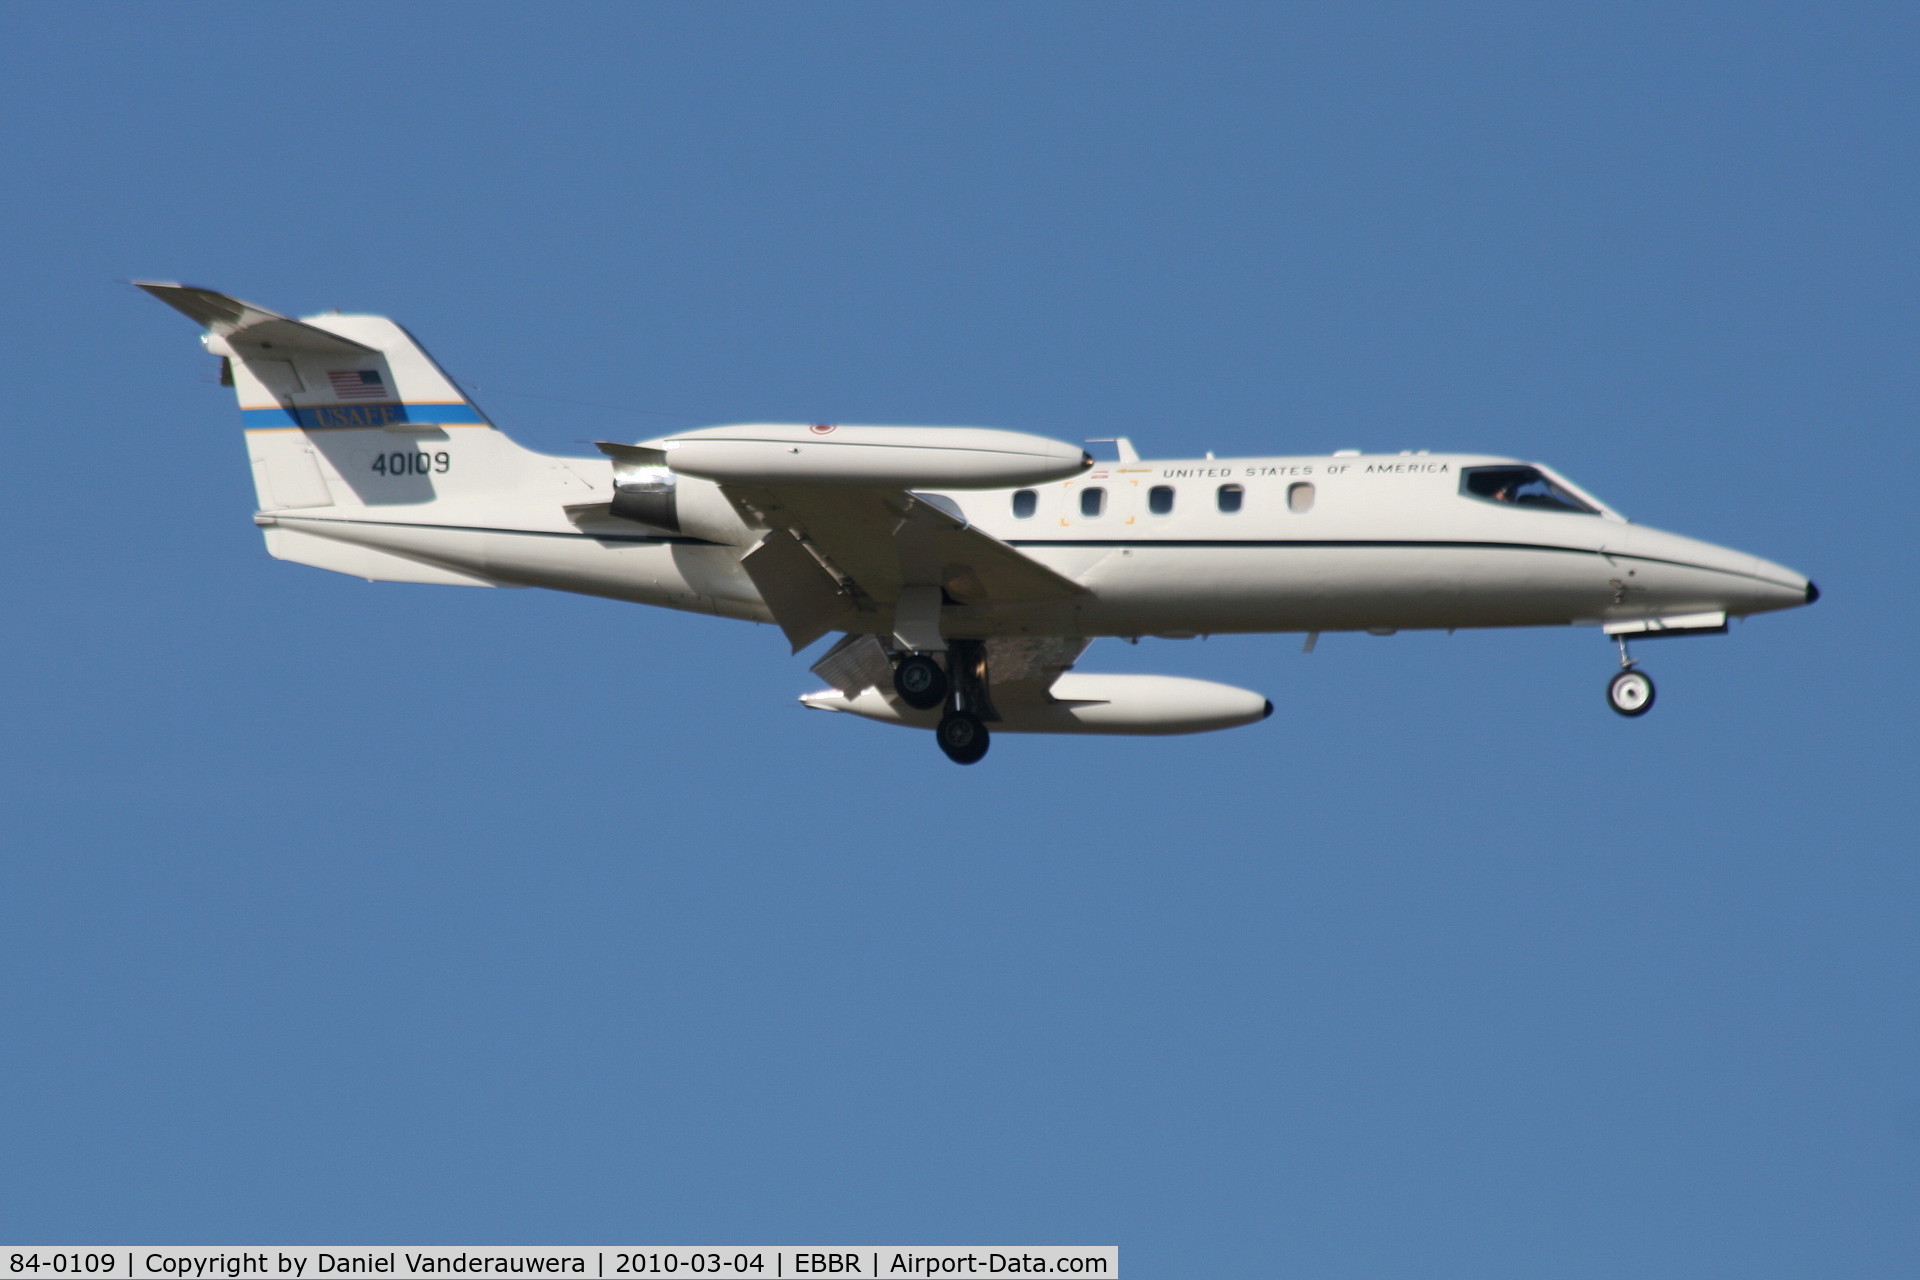 84-0109, 1984 Gates Learjet C-21A C/N 35A-555, Arrival to RWY 02